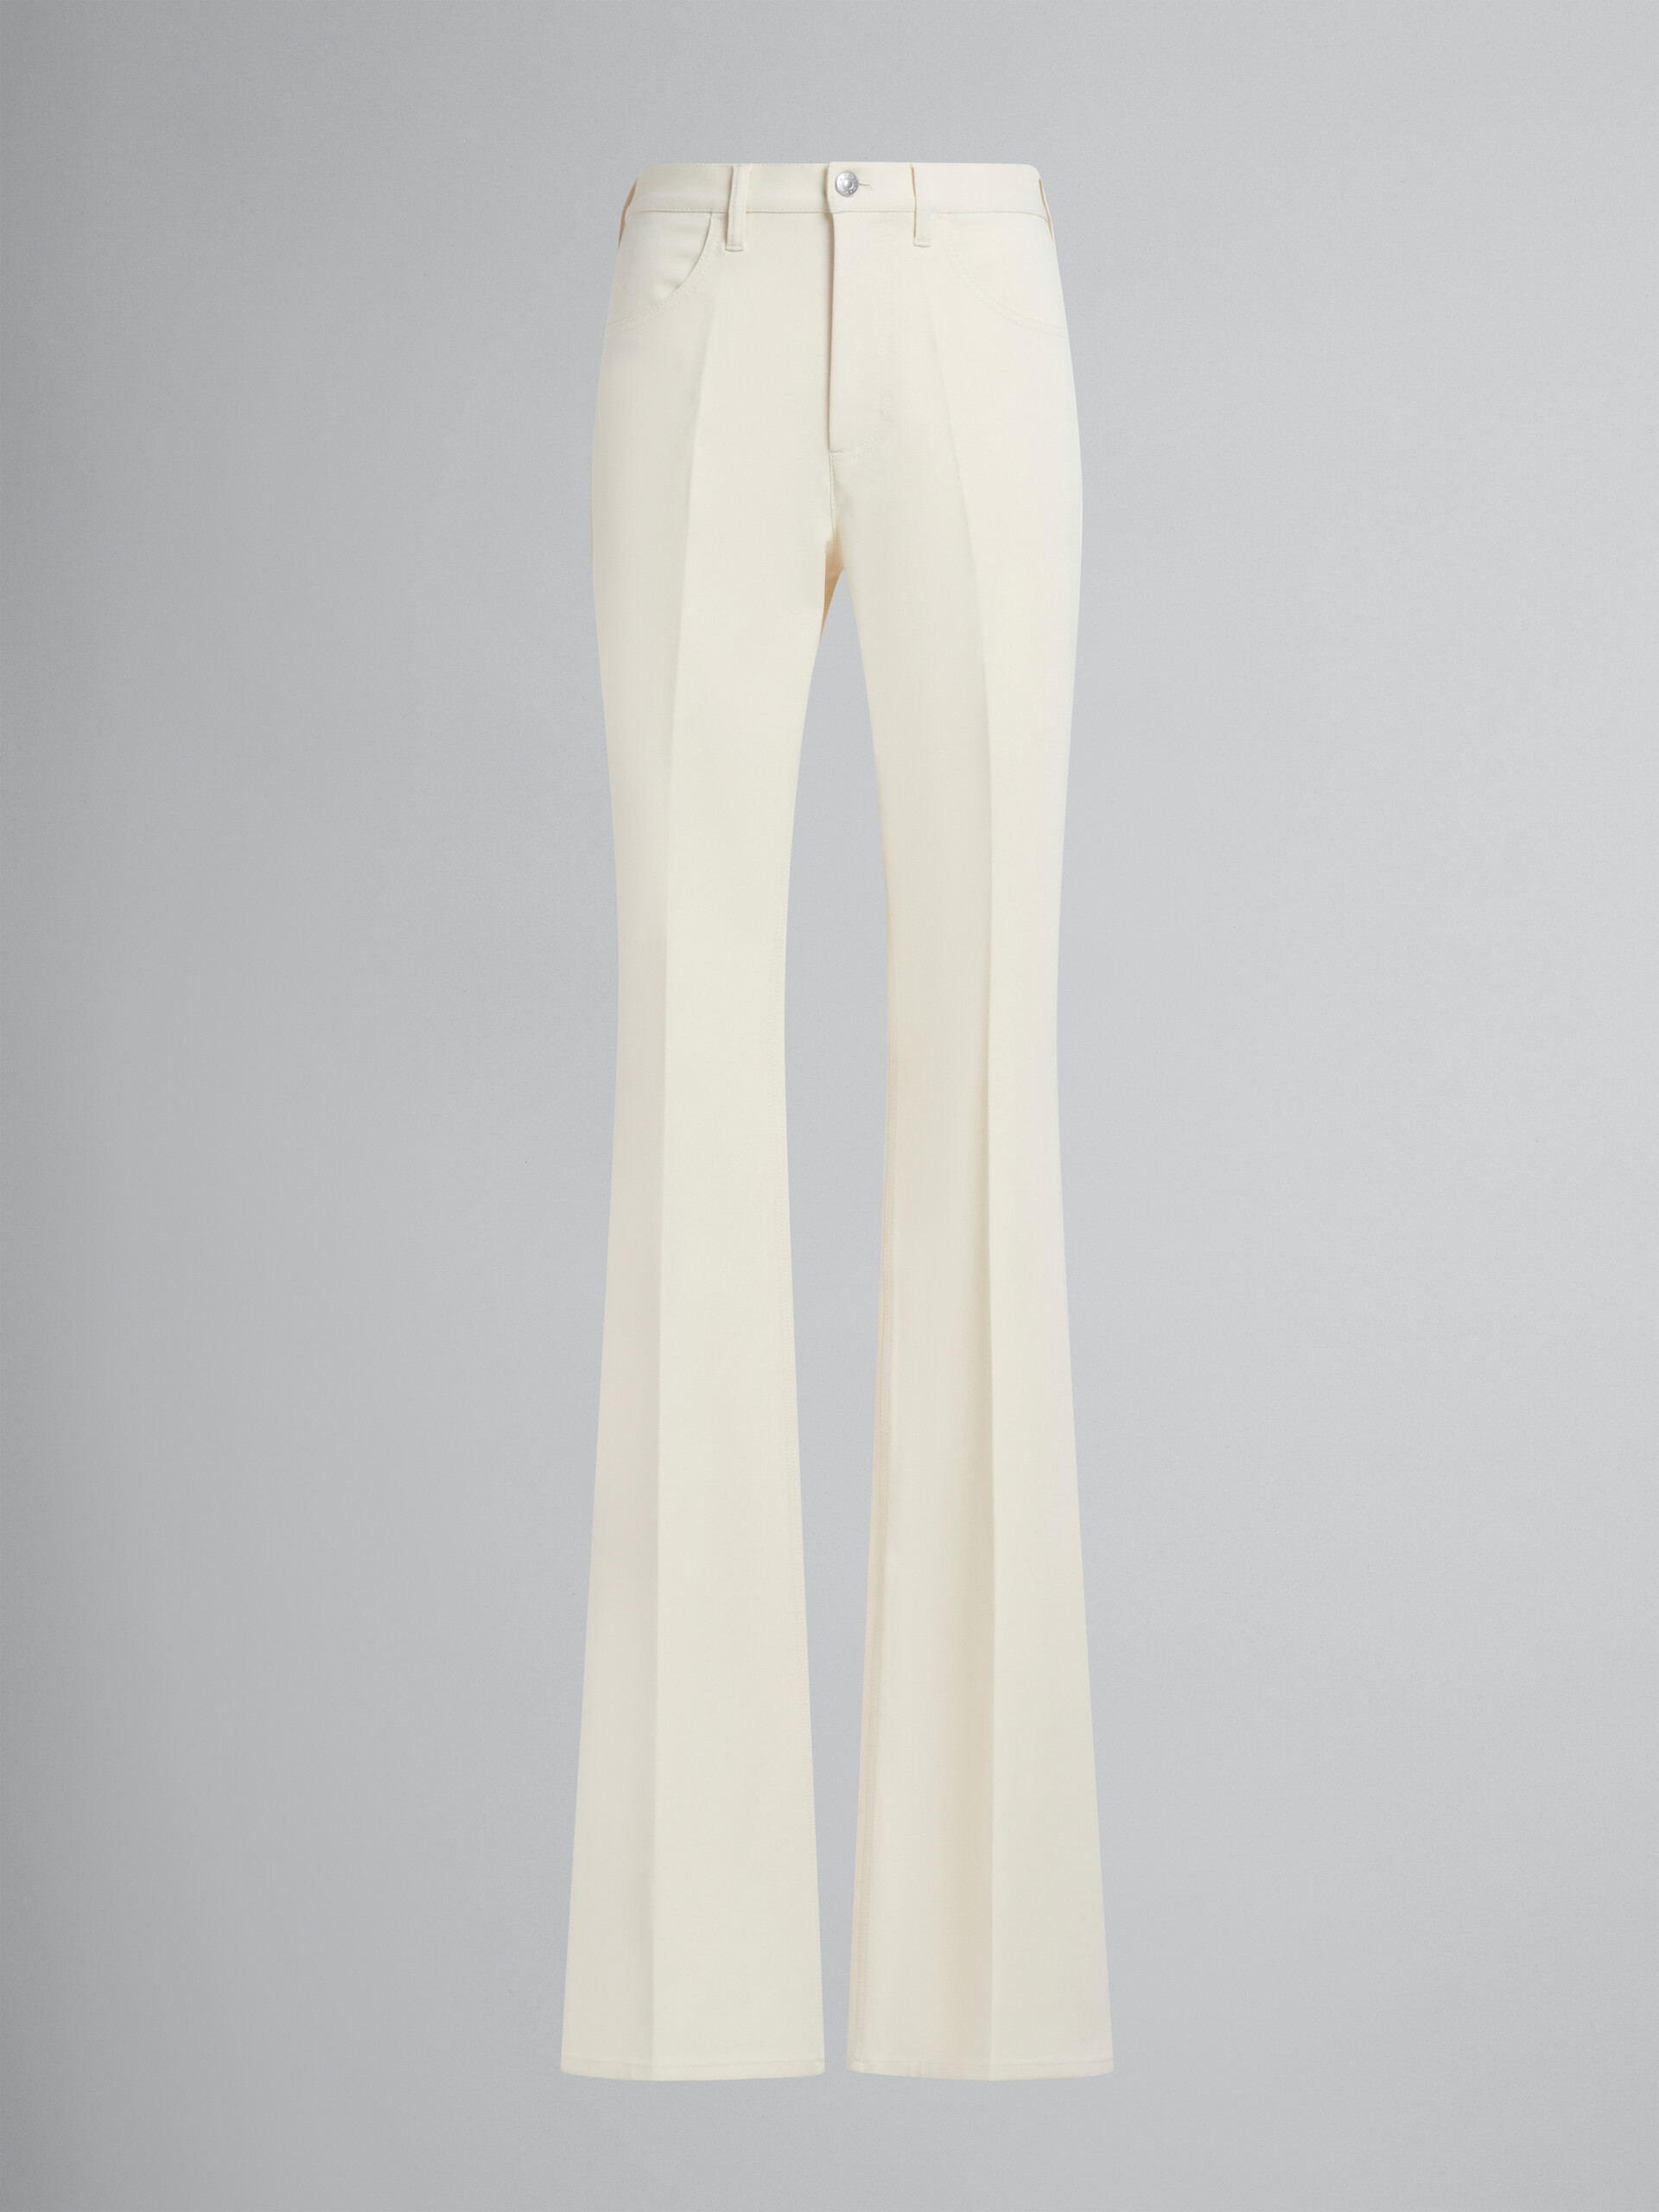 White flared jersey trousers - Pants - Image 1